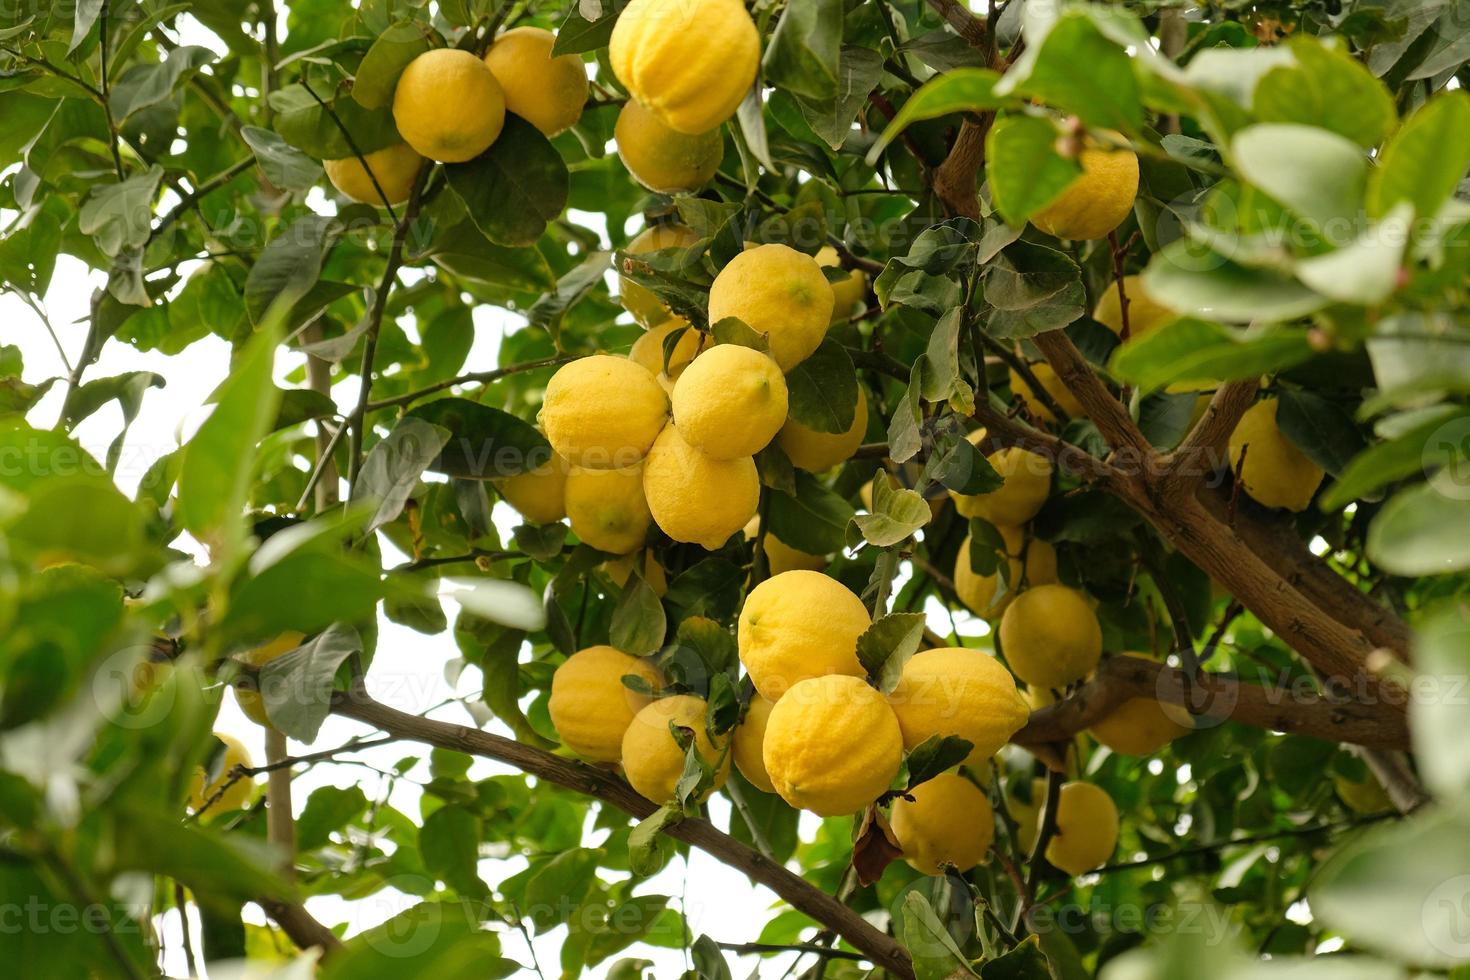 Yellow citrus lemon fruits and green leaves on lemon tree branch in sunny garden. Close-up of lemons hanging from a tree in a lemon grove. photo